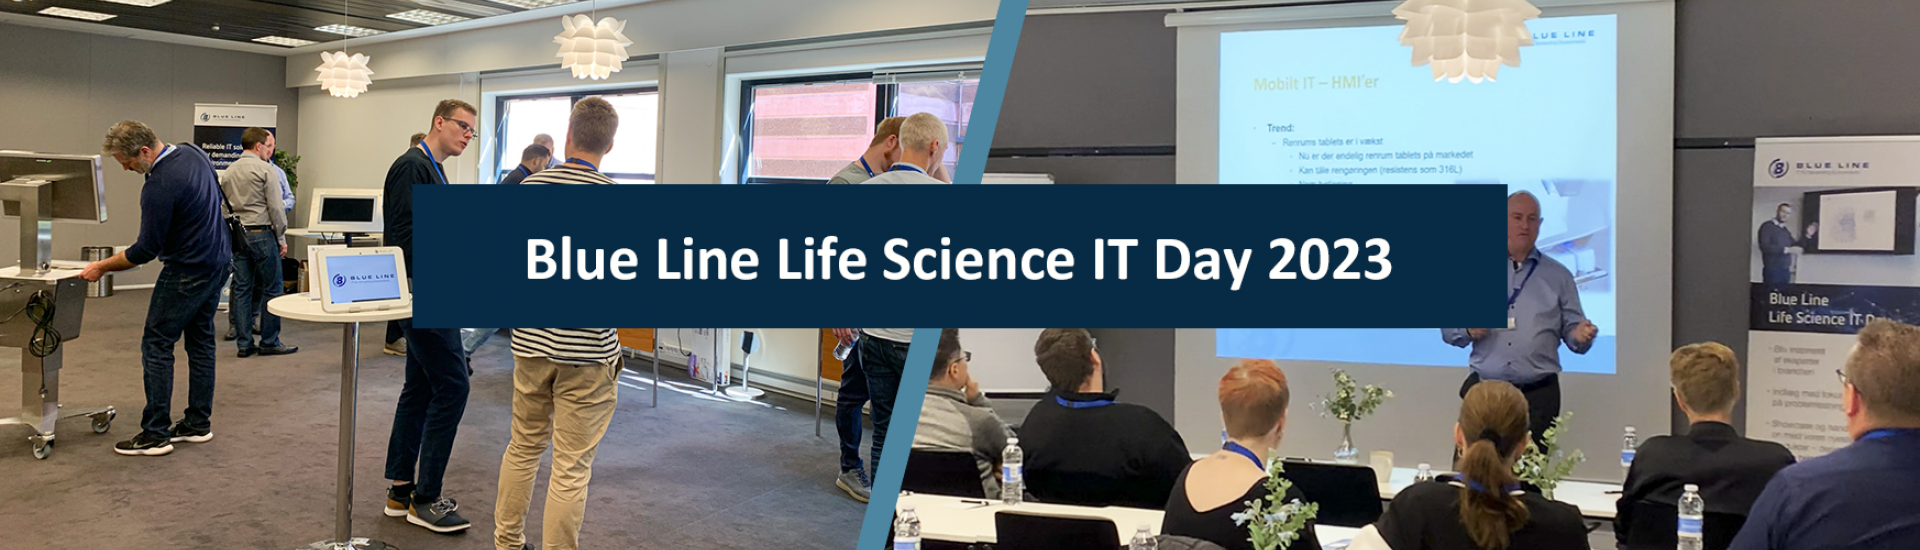 INVITATION – Blue Line Life Science IT Day 2023